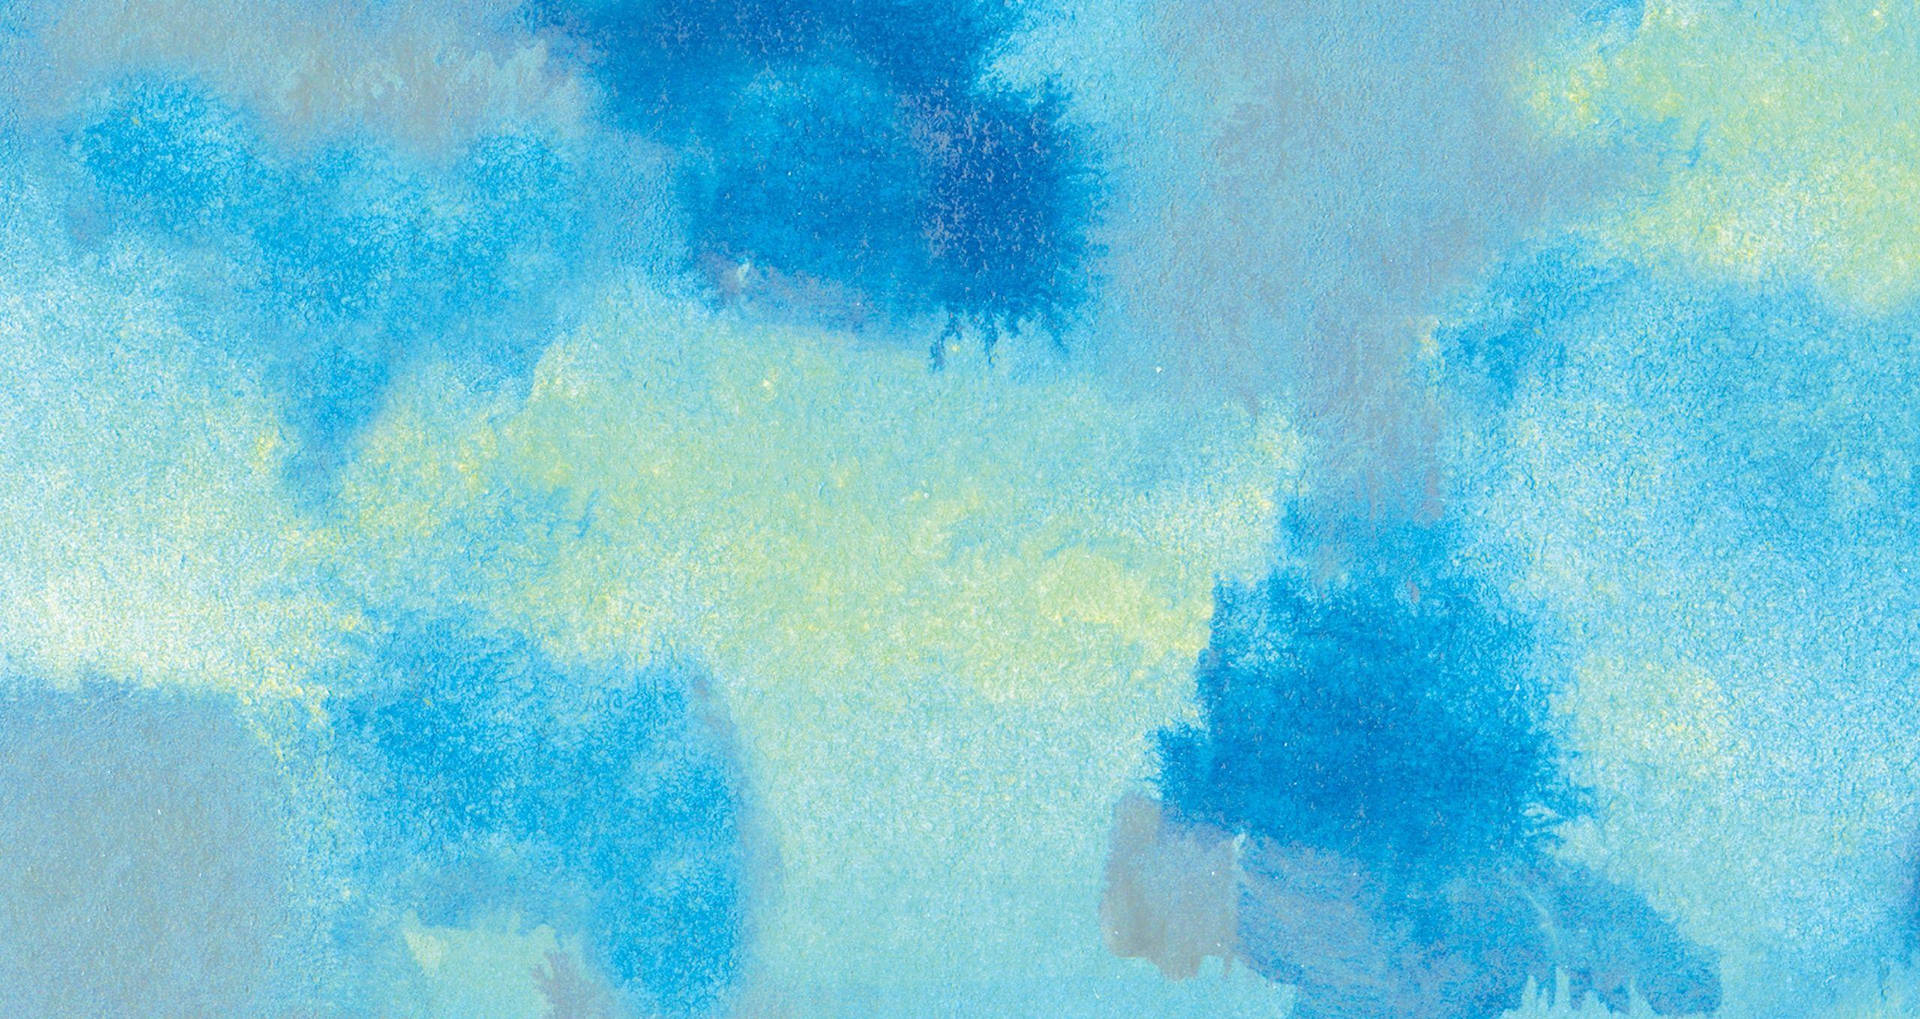 Impressionist Splotch Painting Aesthetic Teal